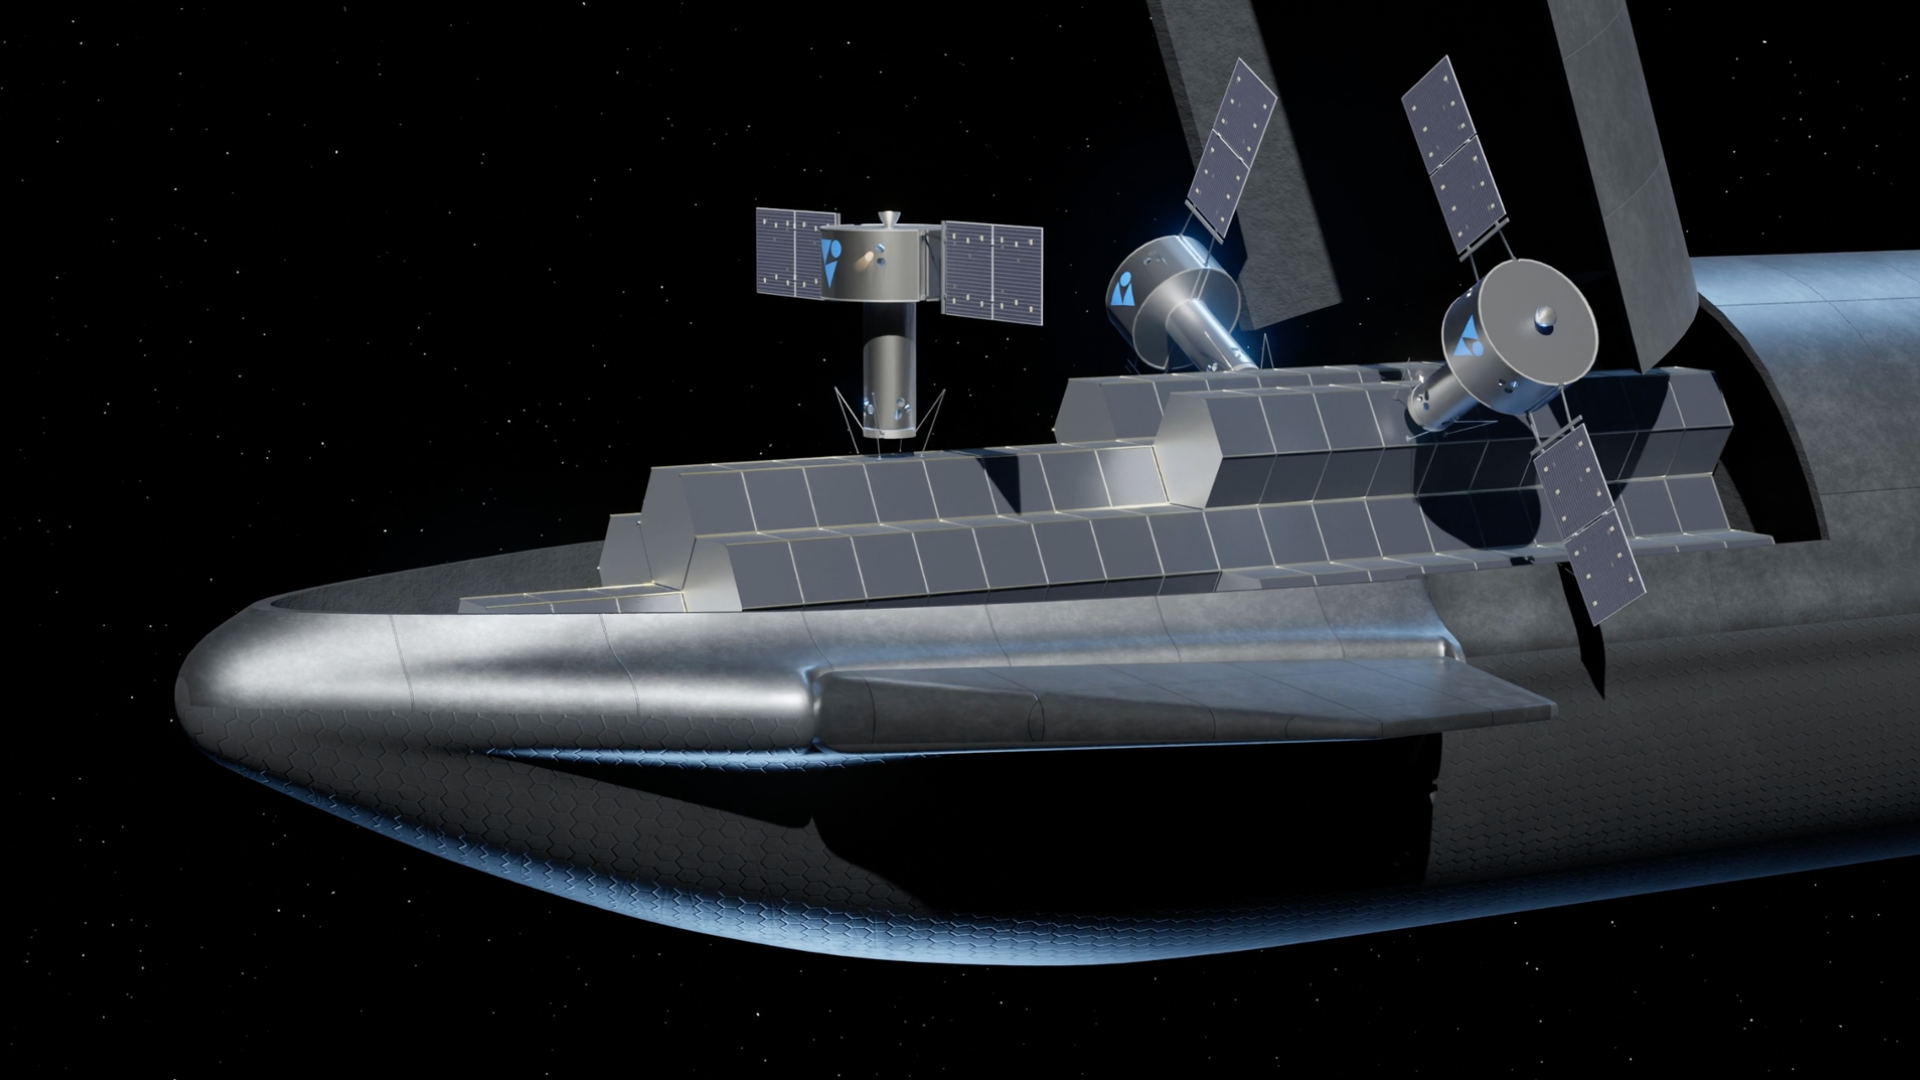 SpaceX’s Starship could help beam solar power from space, says startup [Video]